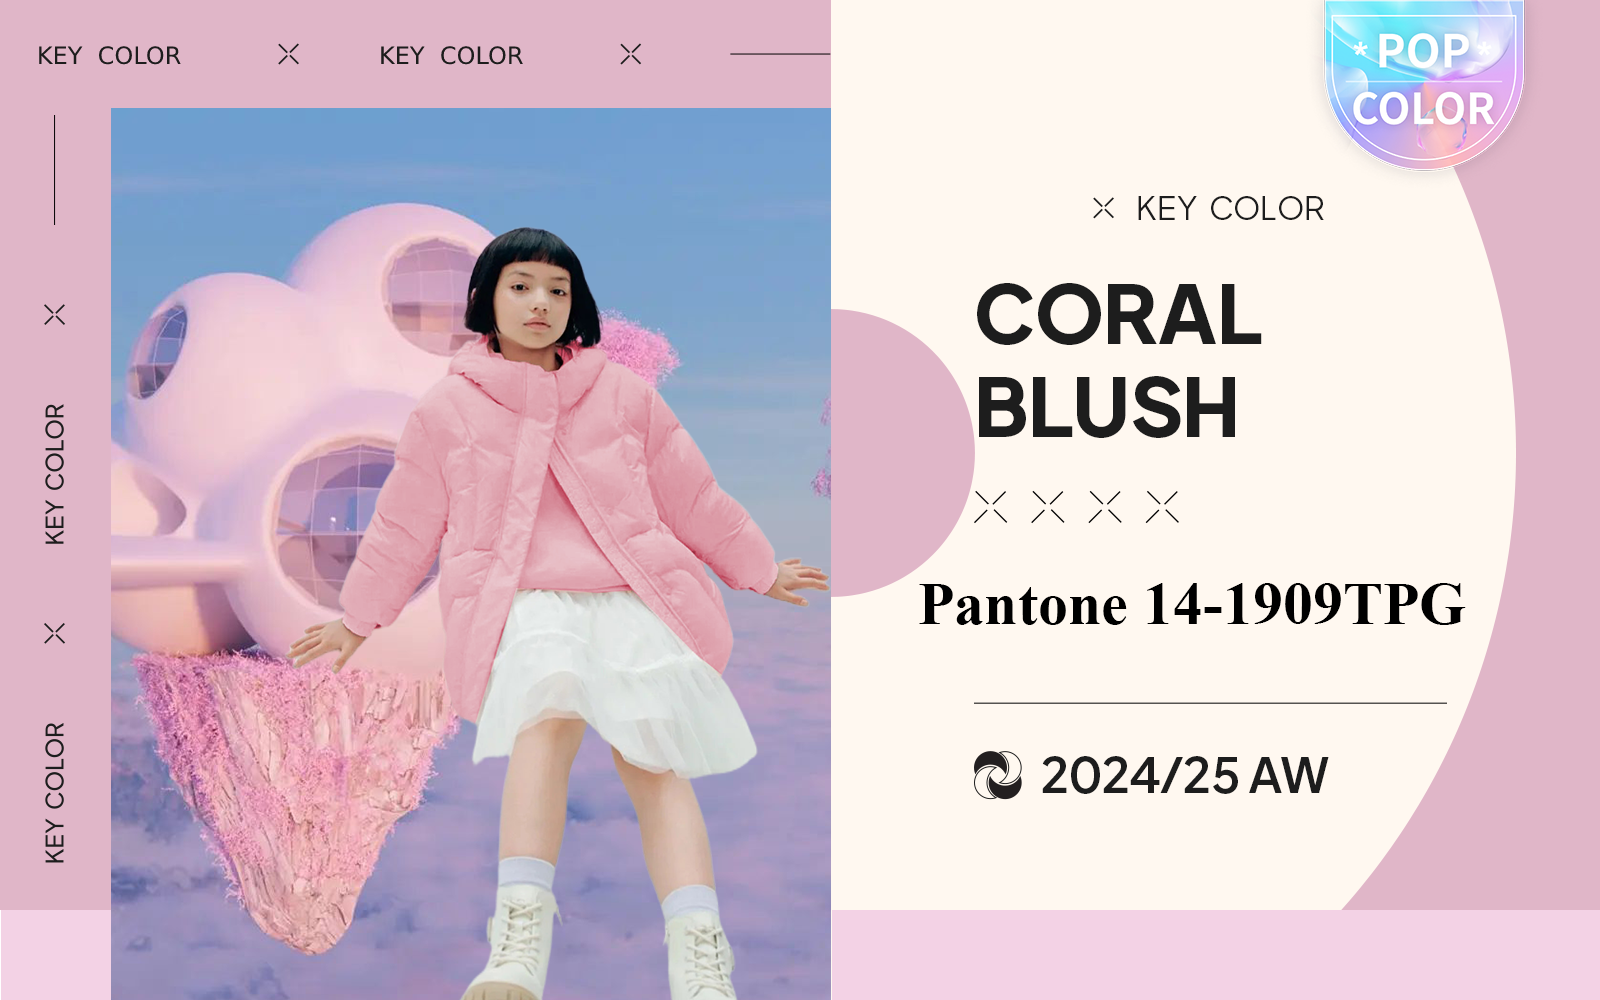 Coral Blush -- The Color Trend for Girlswear